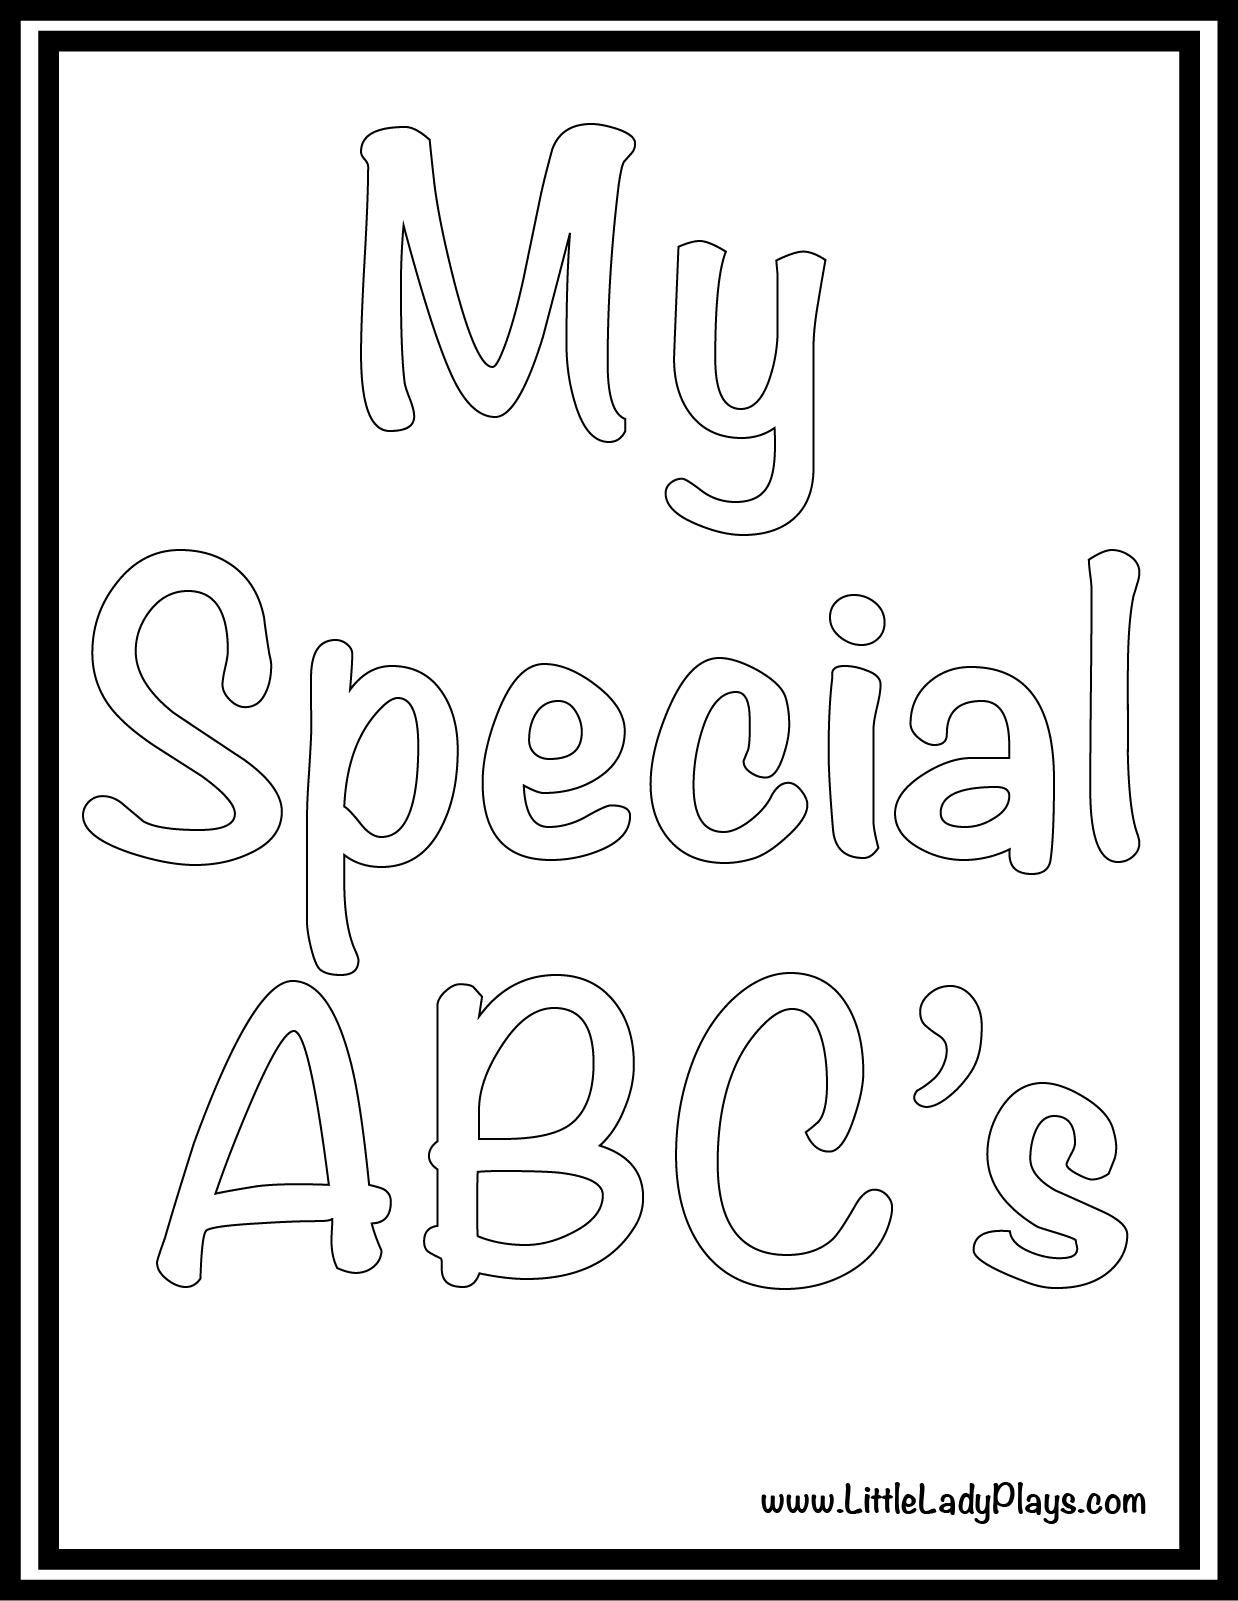 Free Printable Alphabet Worksheets For 4 Year Olds In 2020 with Alphabet Worksheets For 4 Year Olds